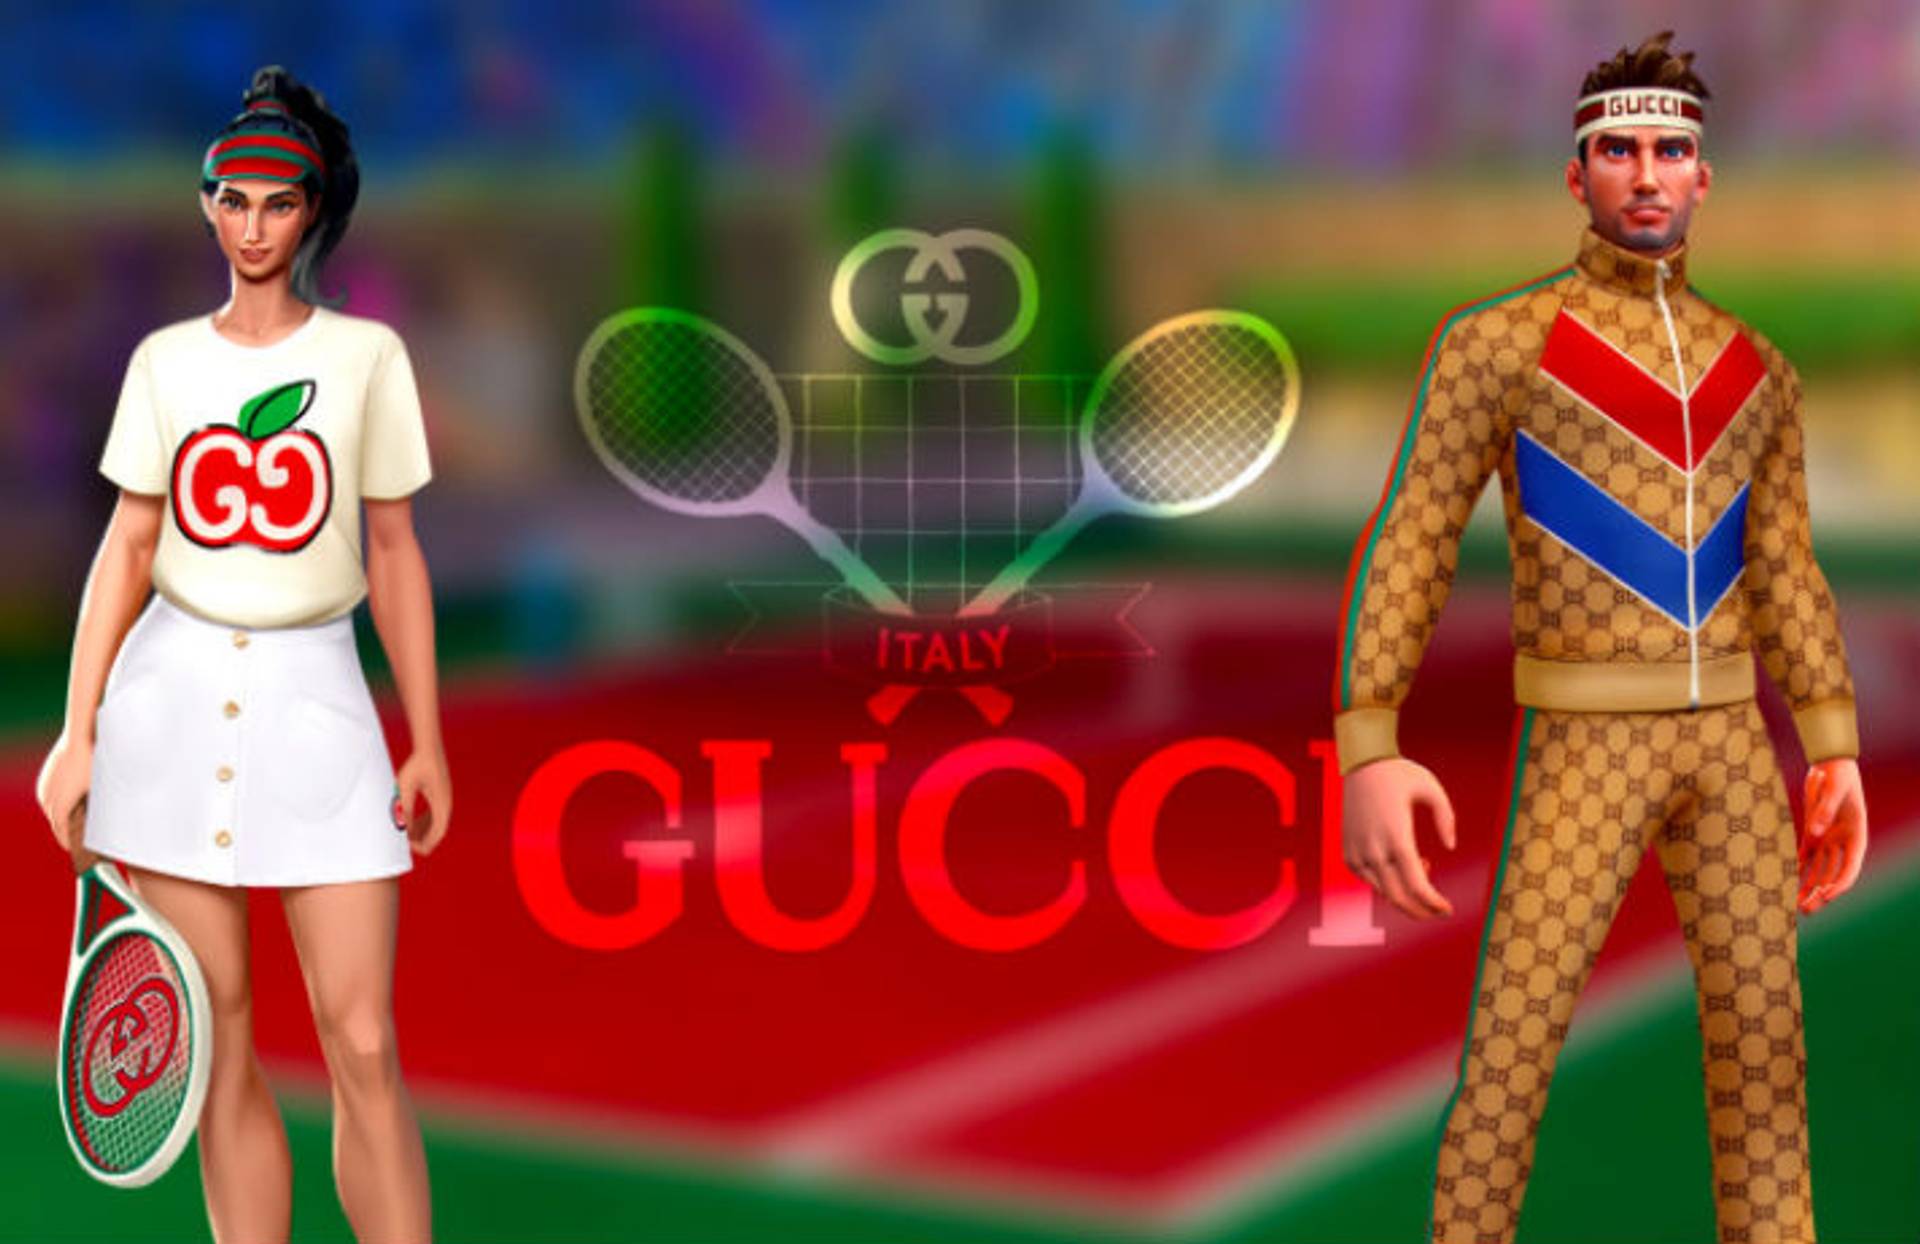 Gucci courts gamers with virtual tennis collection